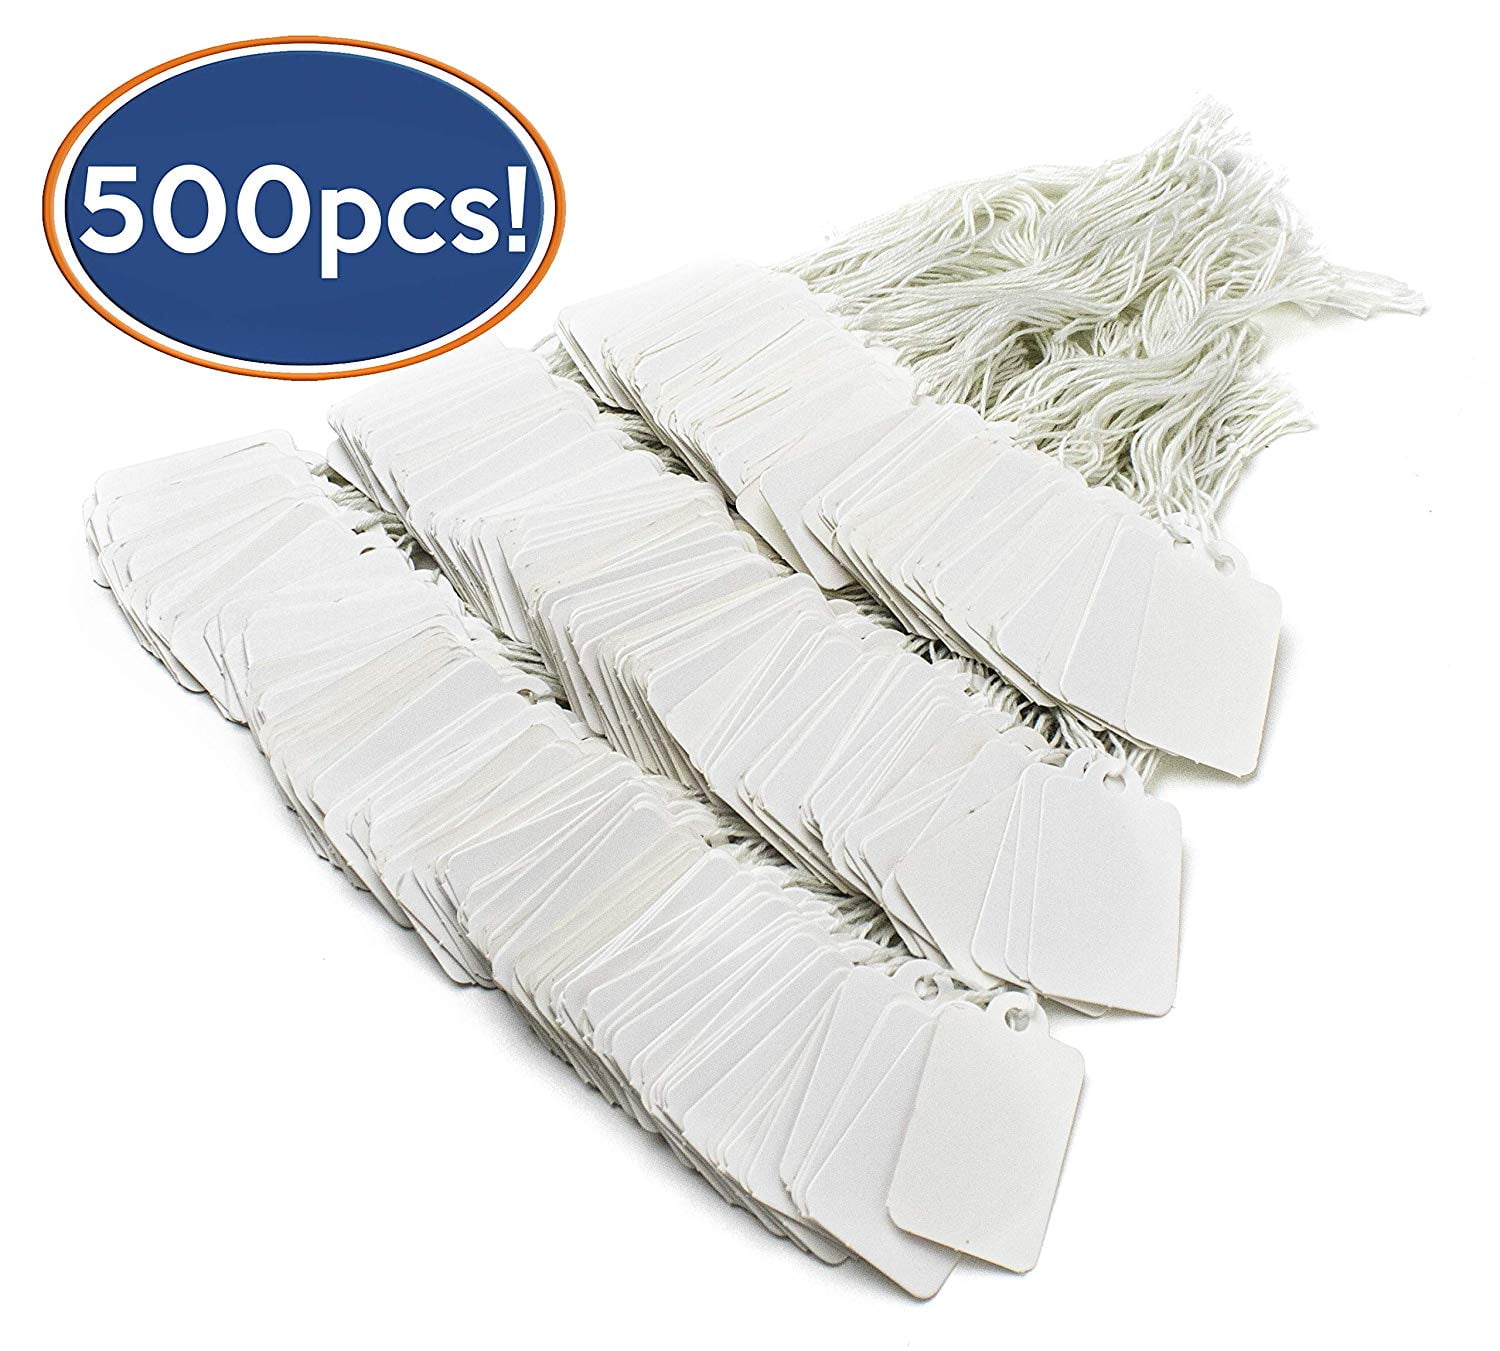 500pcs Jewelry Price Tag Hanging String Marking Tags Clothing Display Labels 